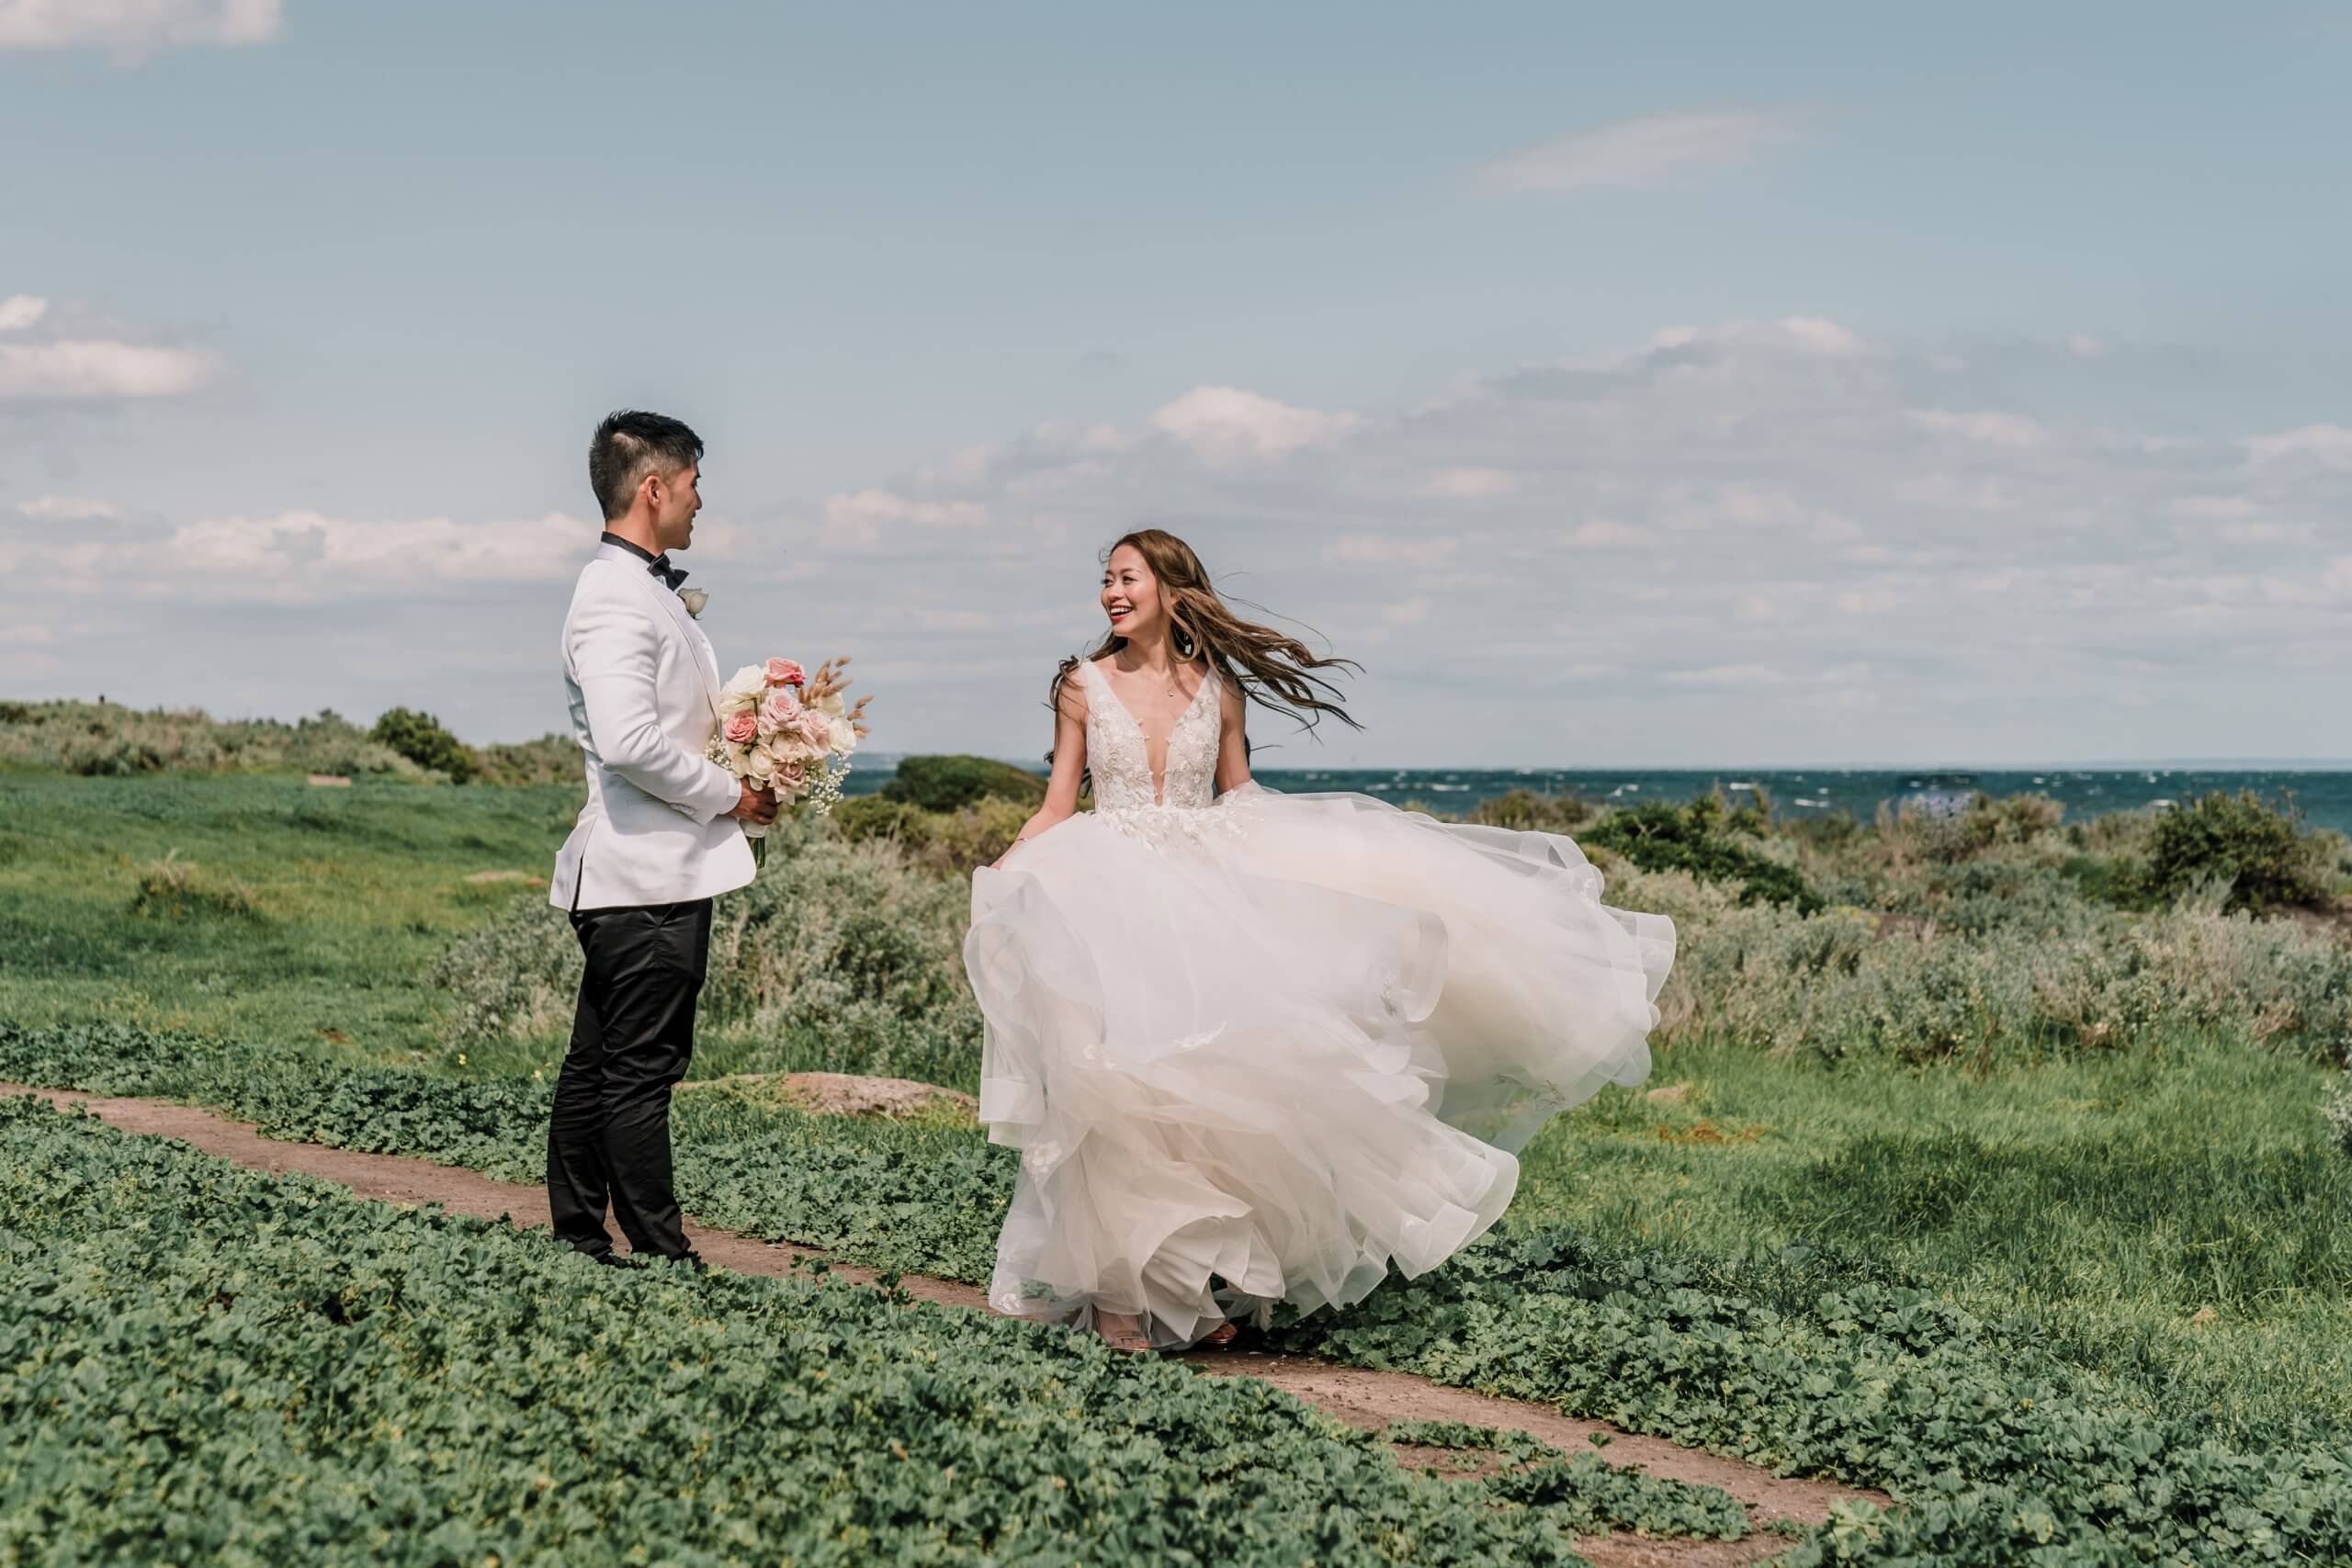 Candid photo of the bride dancing while her groom looks at her - with the sea as the background